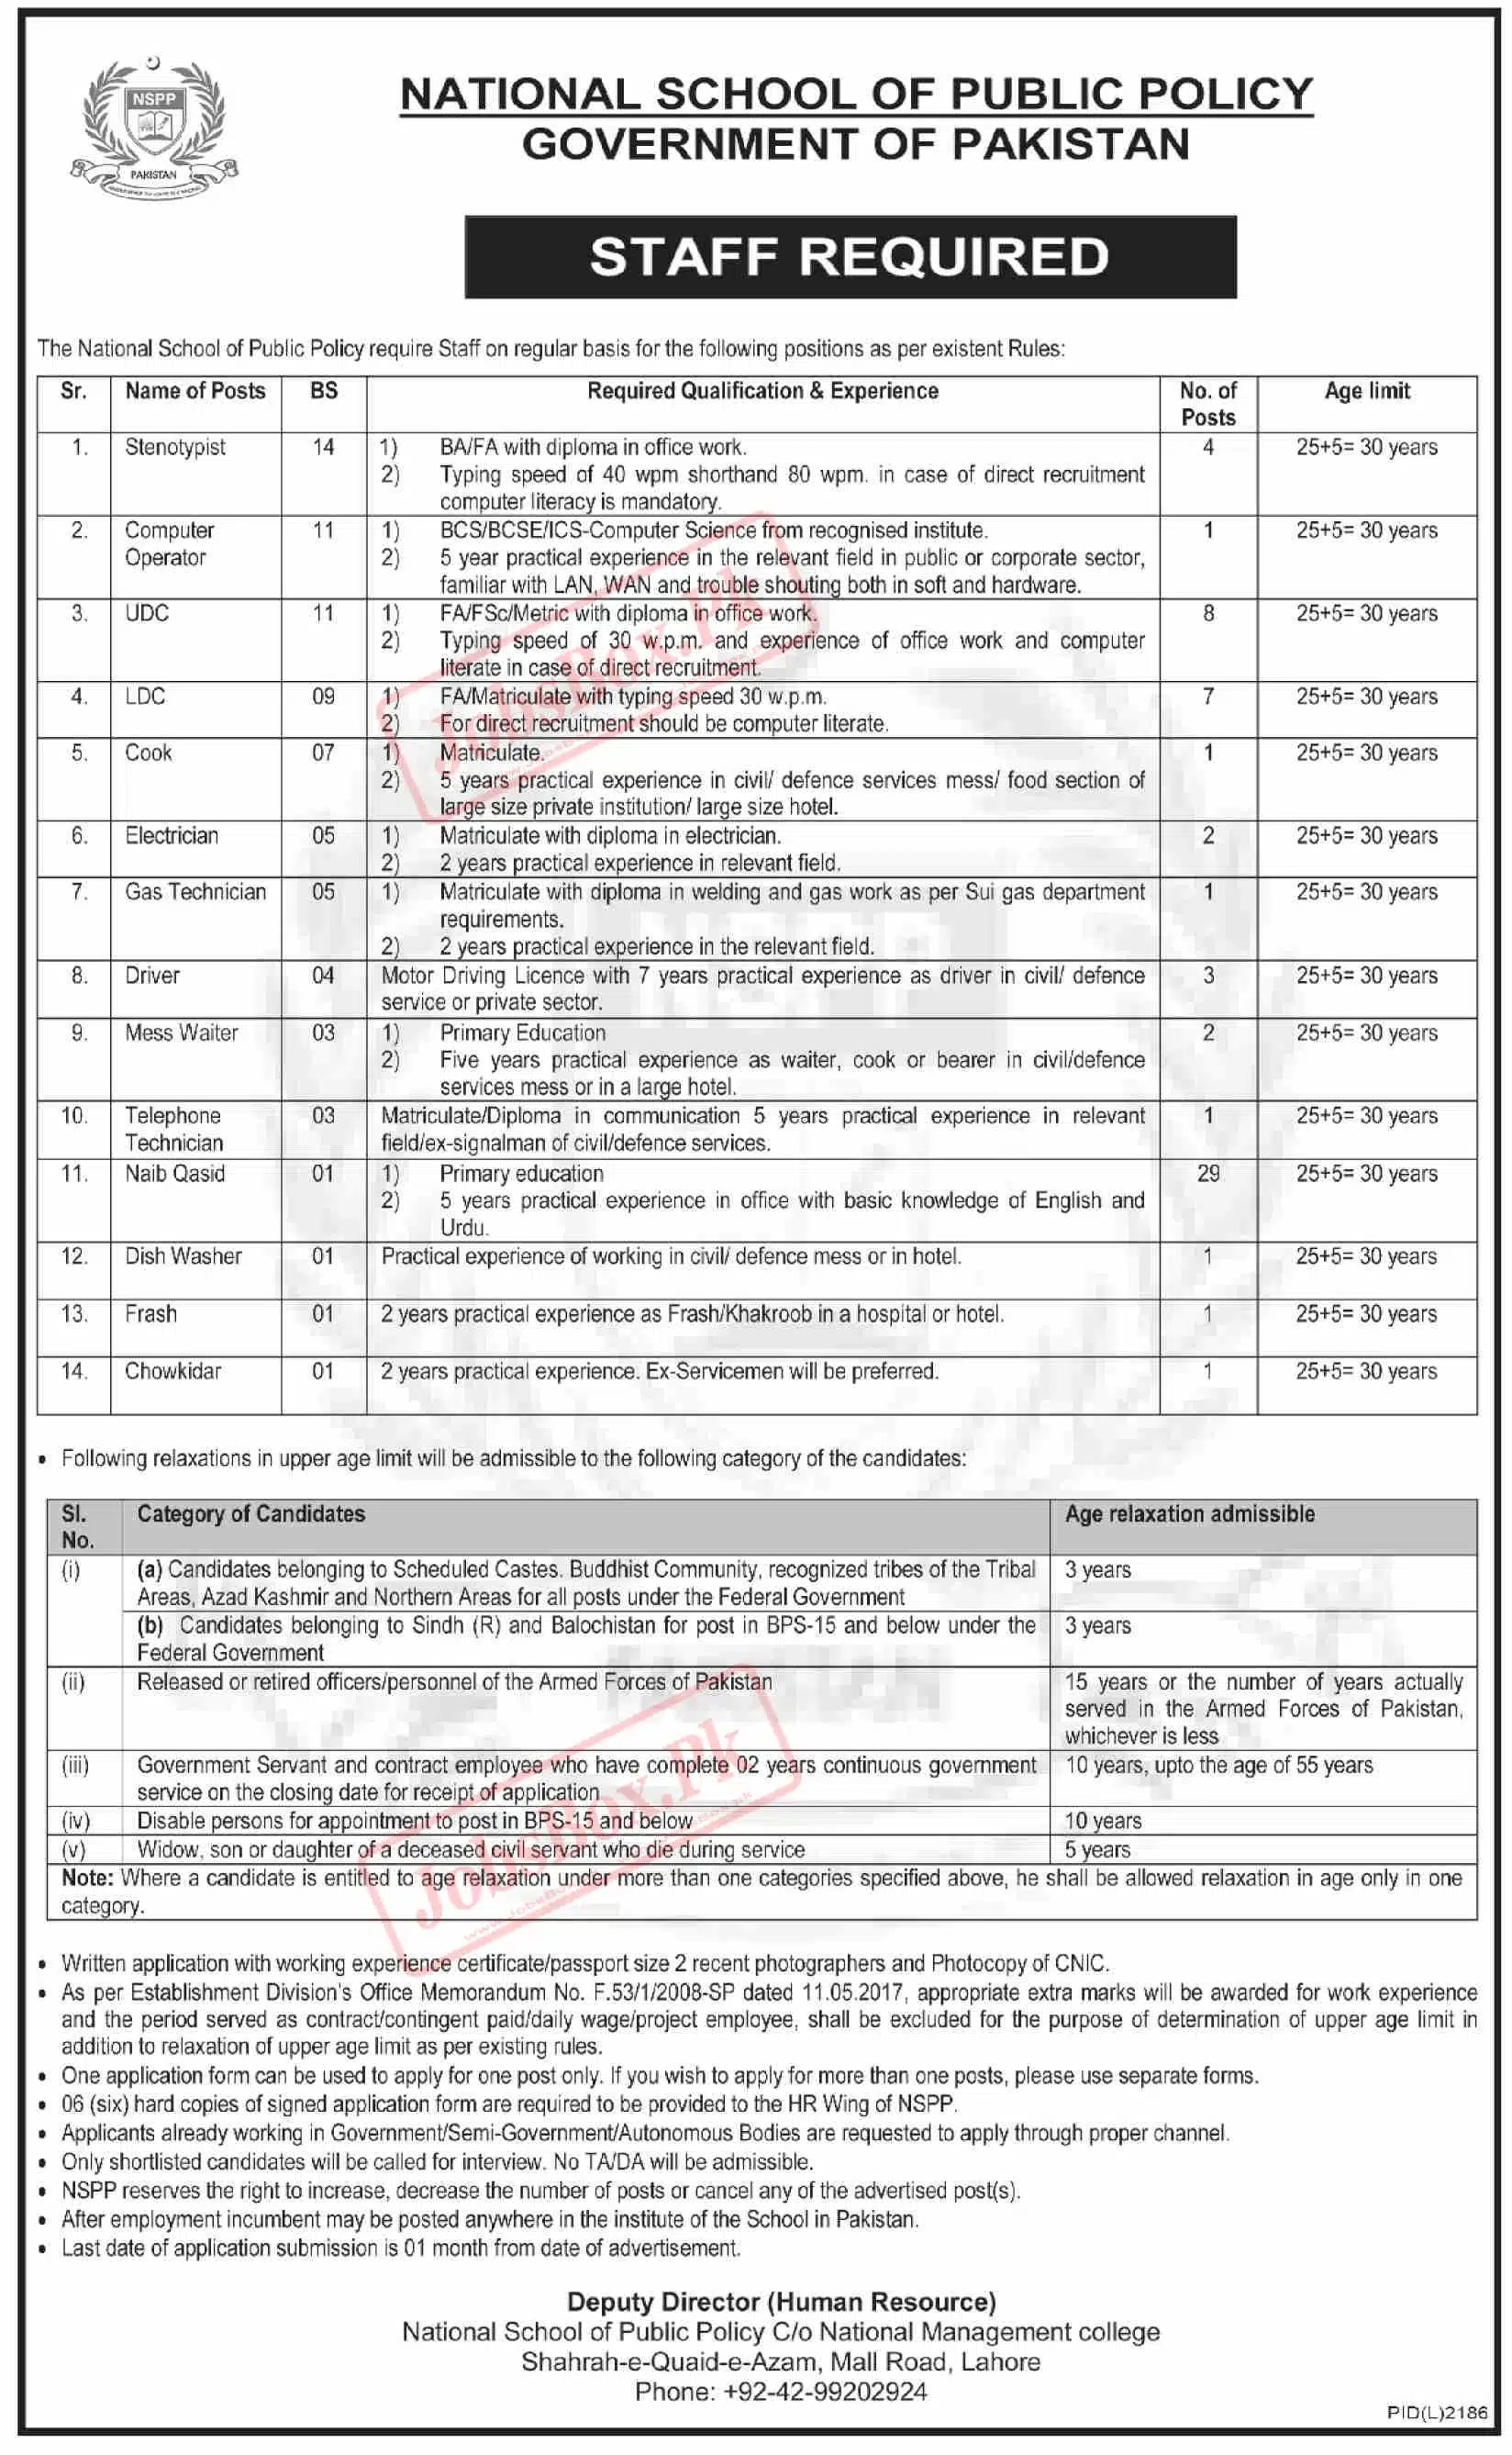 Pakistan Govt Vacancies announced at National School of Public Policy NSPP Ad